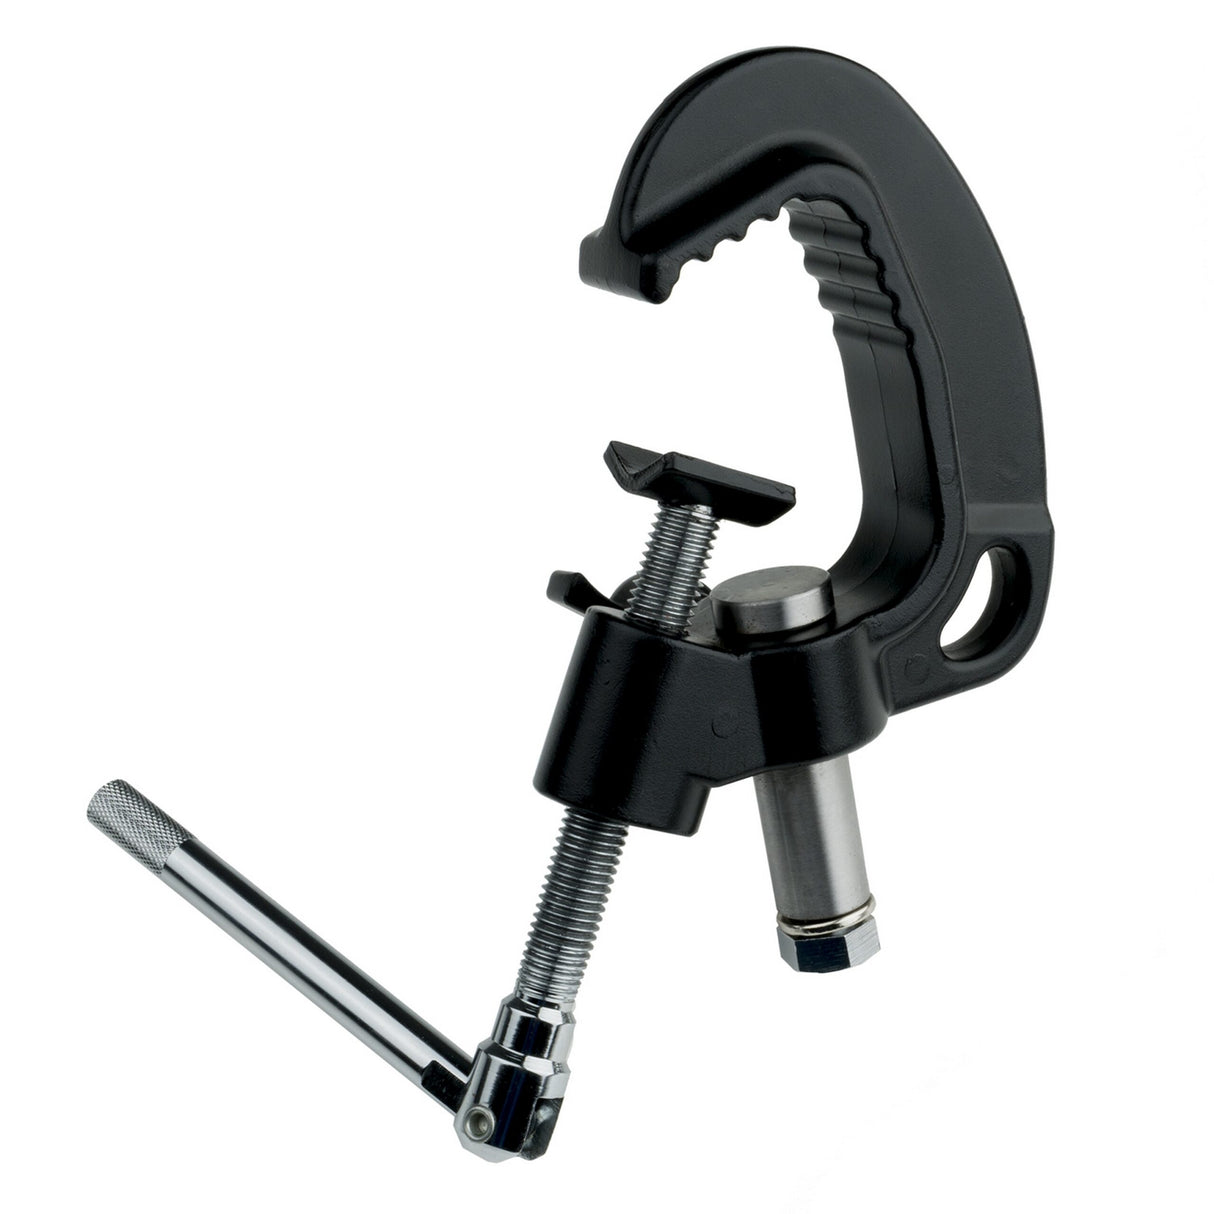 Ikan IOC-713 Iron C-Clamp with 1/2-Inch Attachment Bolt